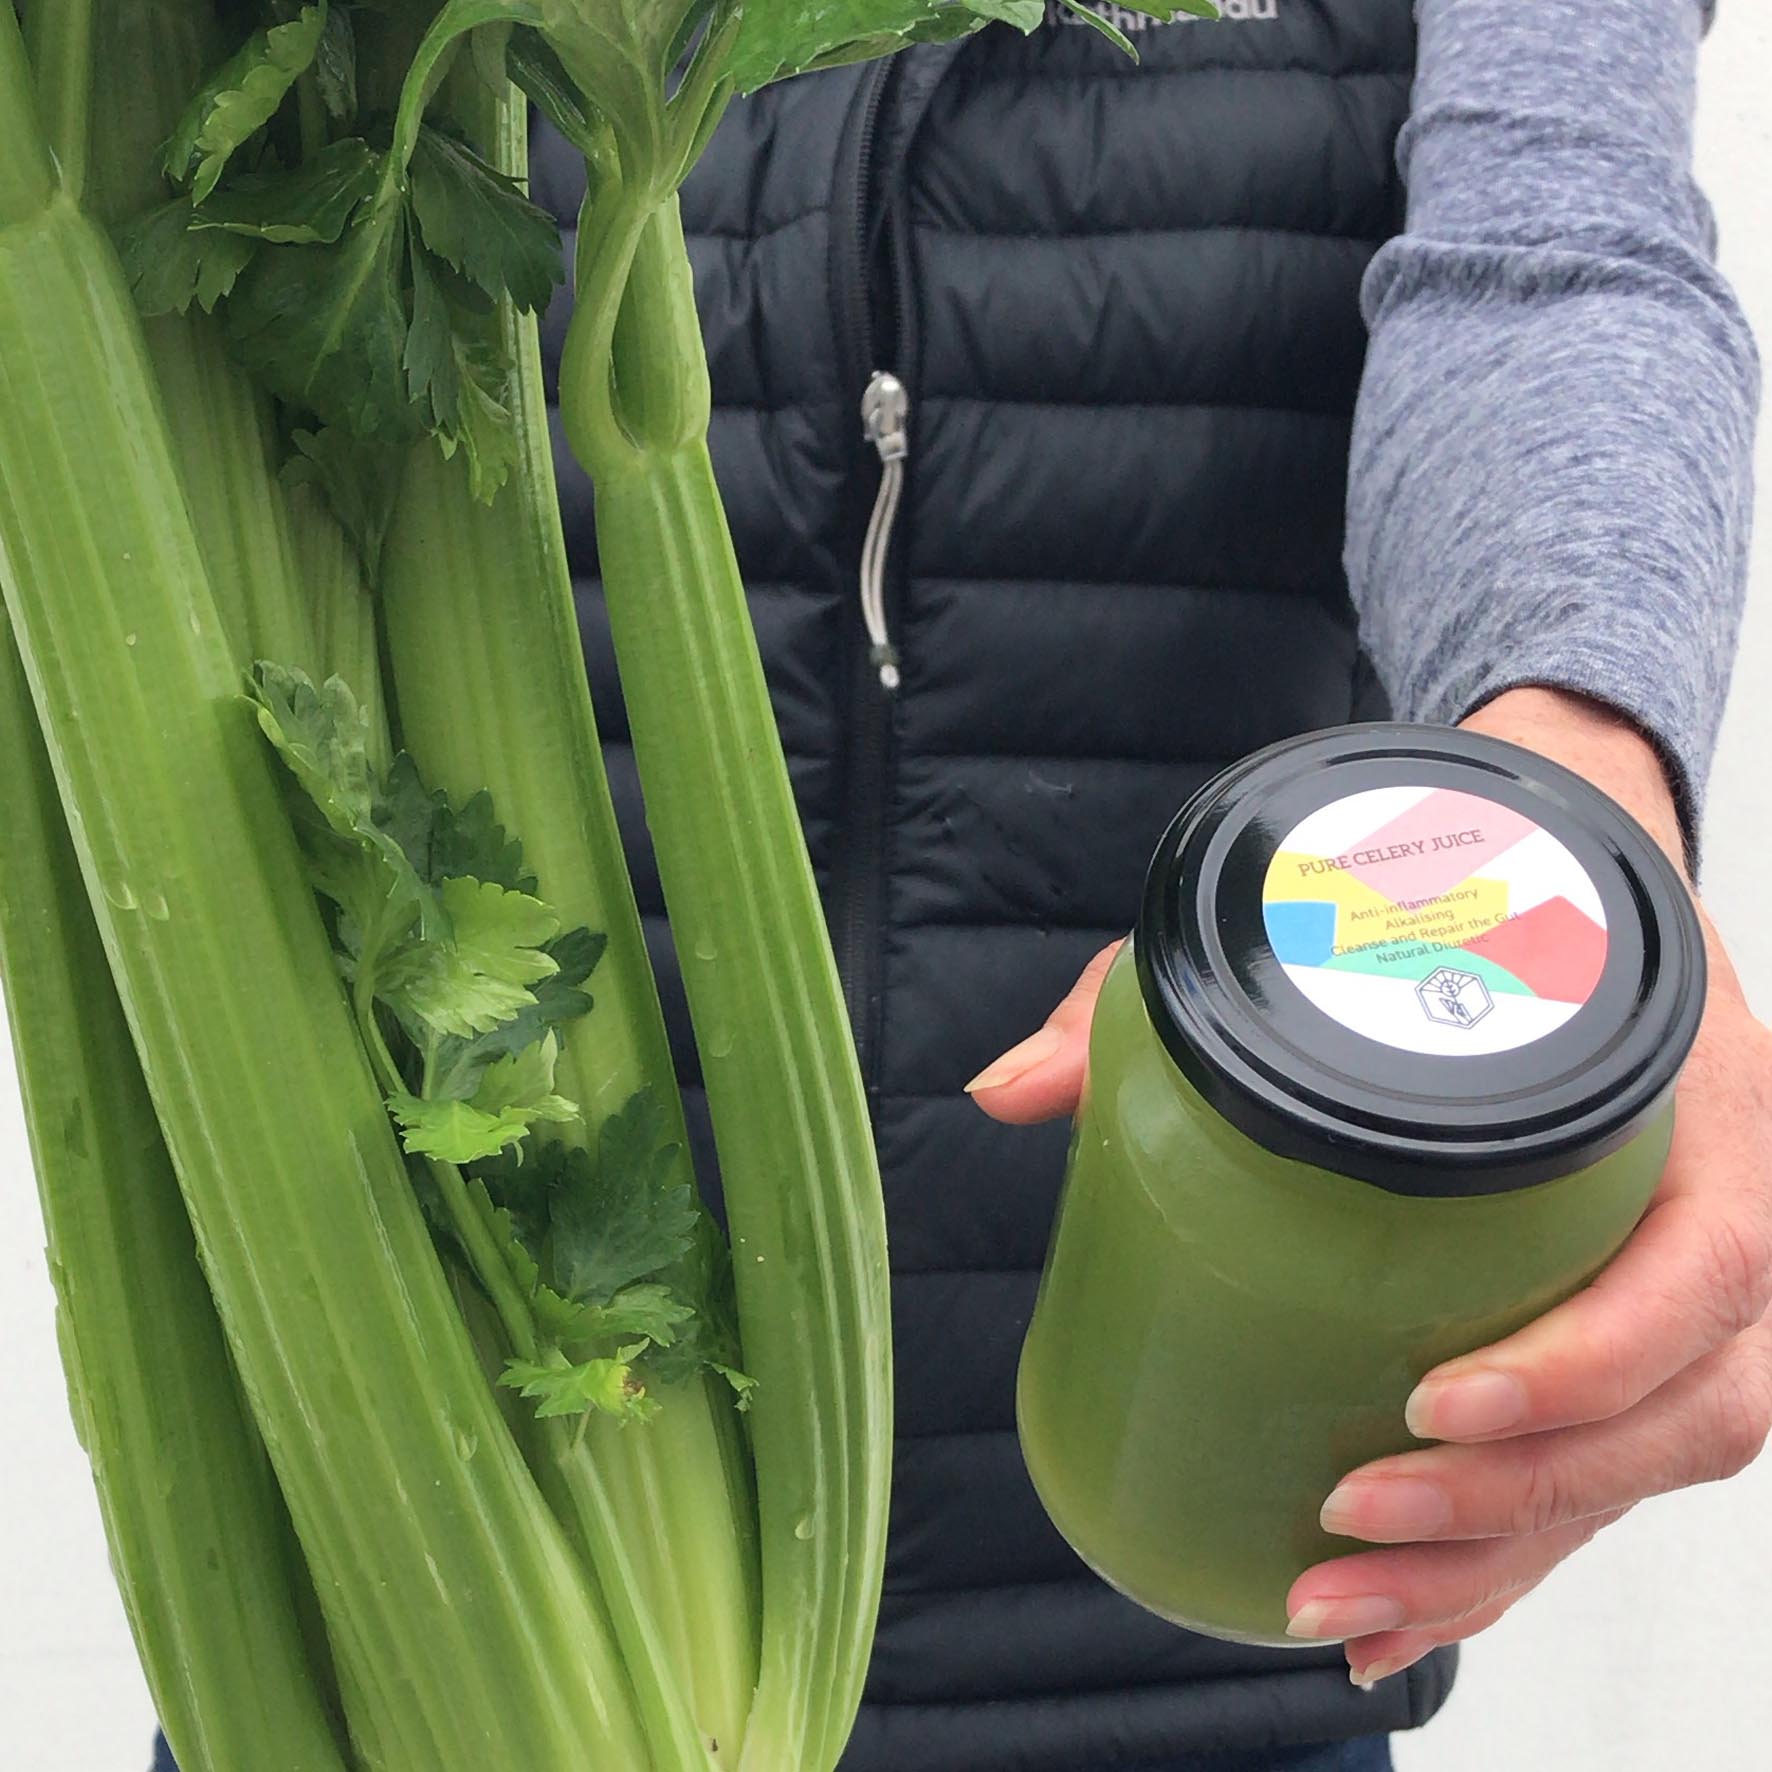 Which is better: Cold Pressed vs Conventional Celery Juice